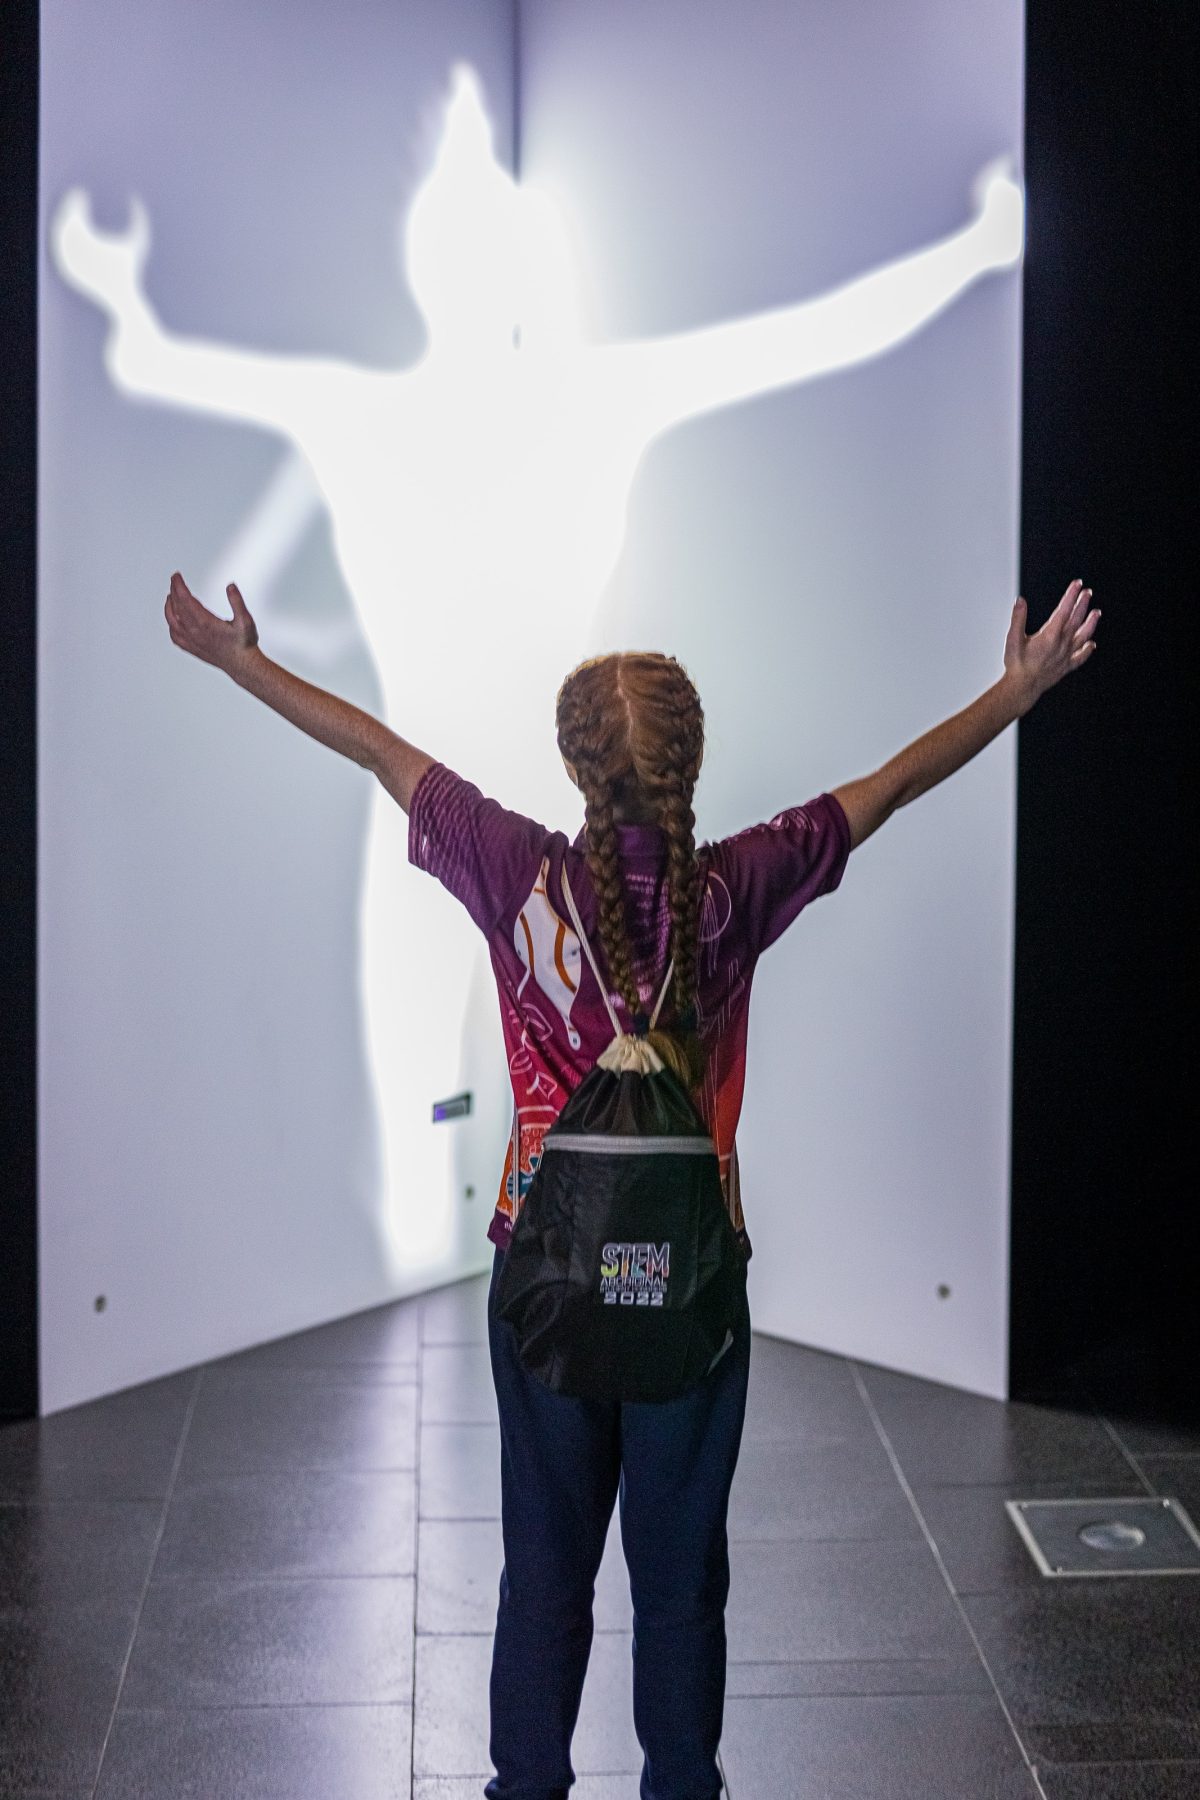 Student standing in front of a white light silhouette of herself